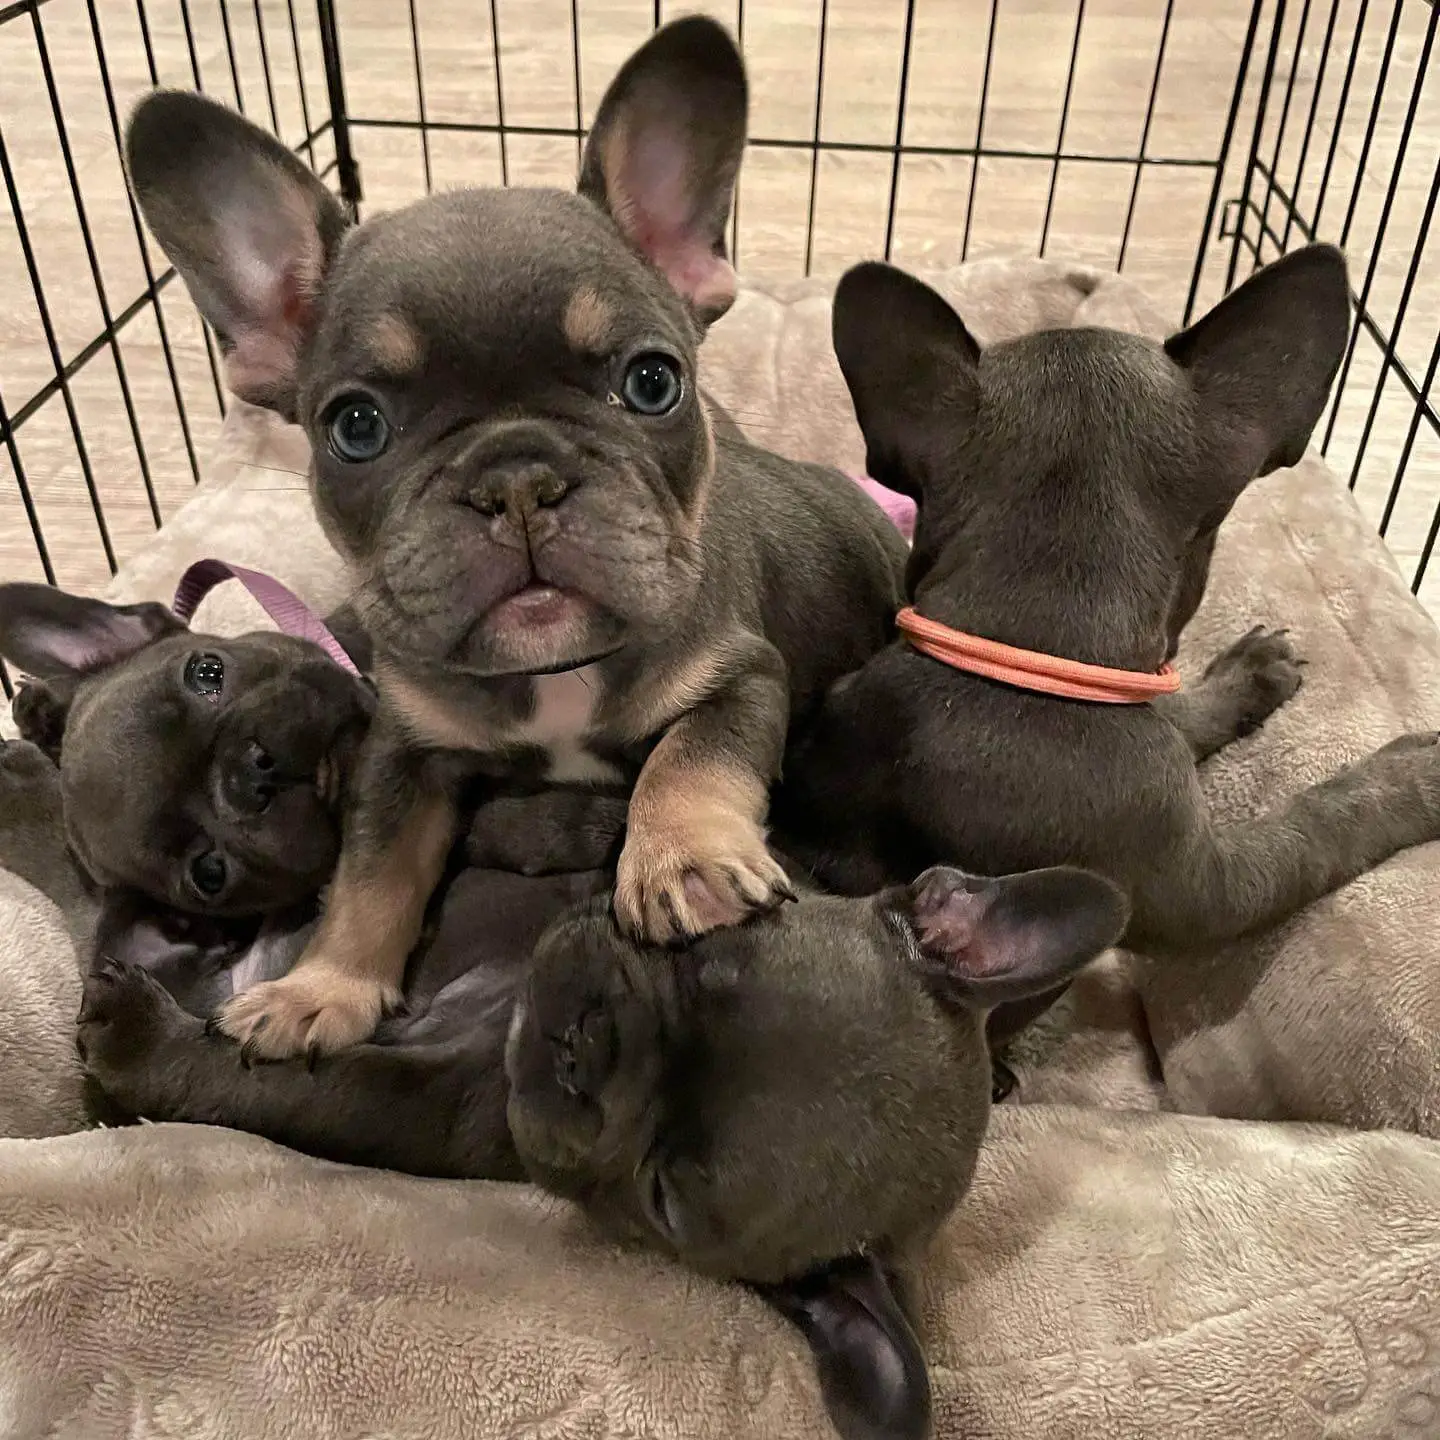 15 Photos Of Adorable French Bulldog Puppies That Make Everyone's Heart ...